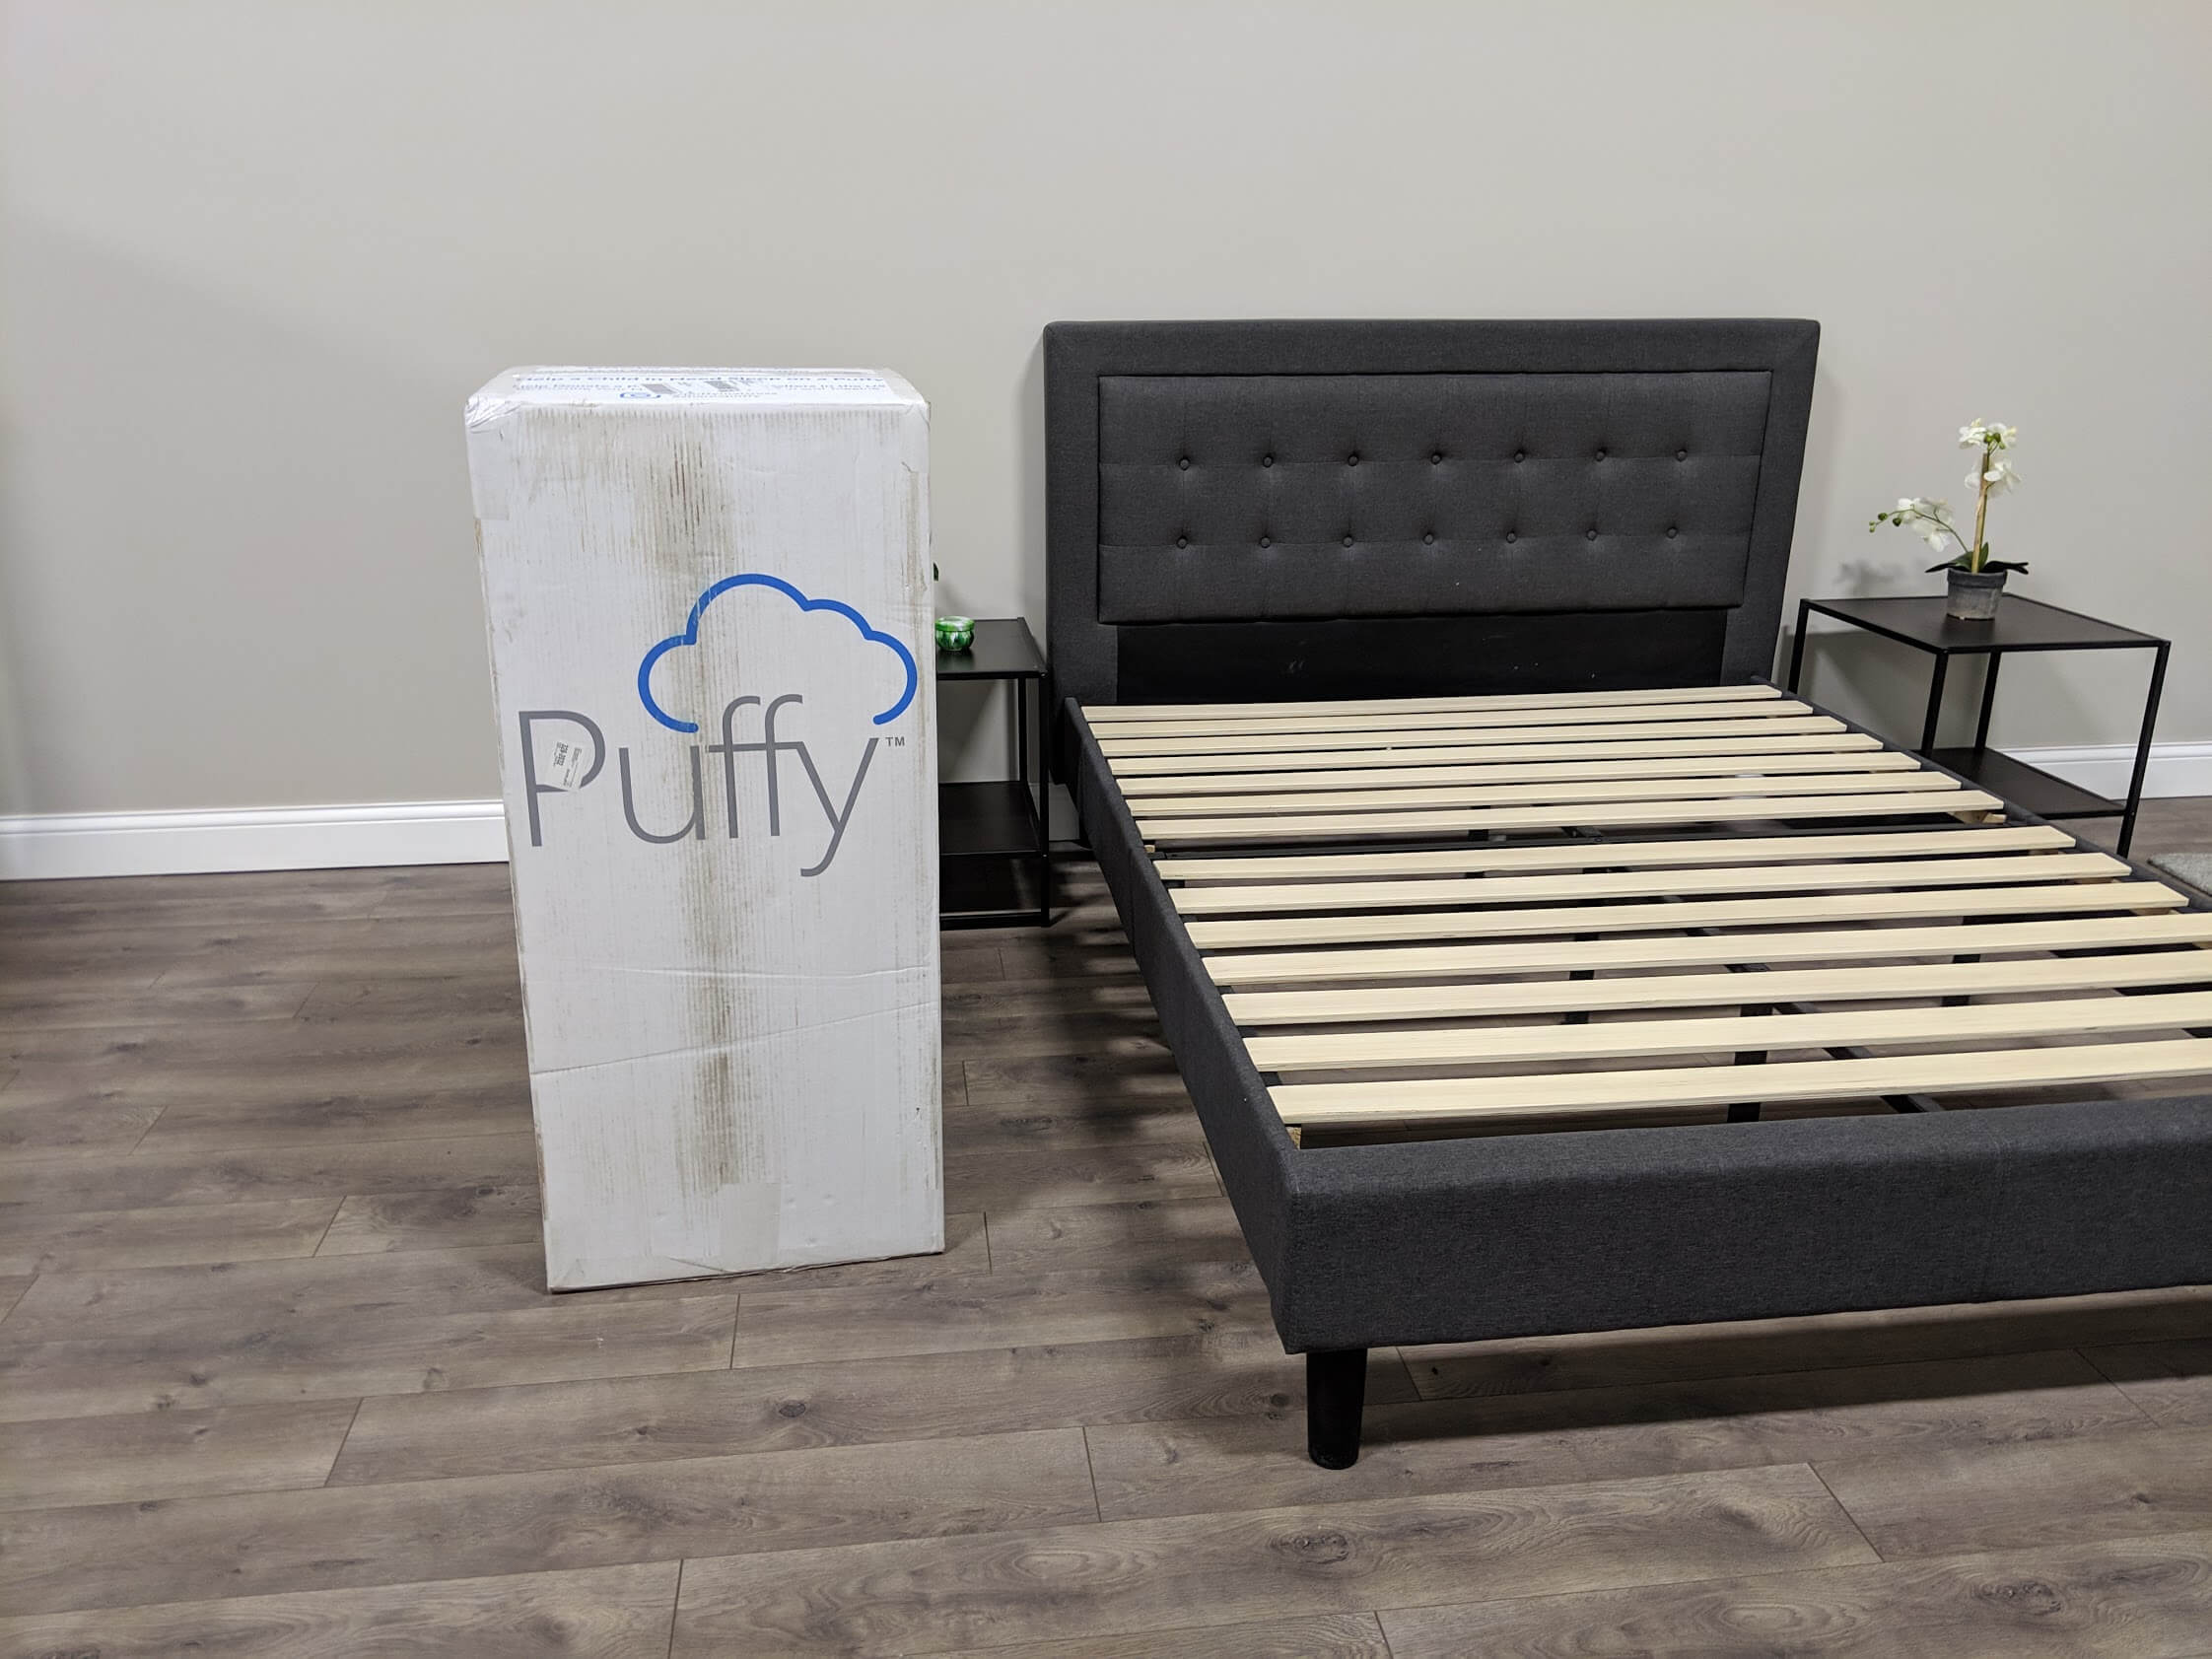 Puffy Mattress Review: Does it Live up to the Hype ...